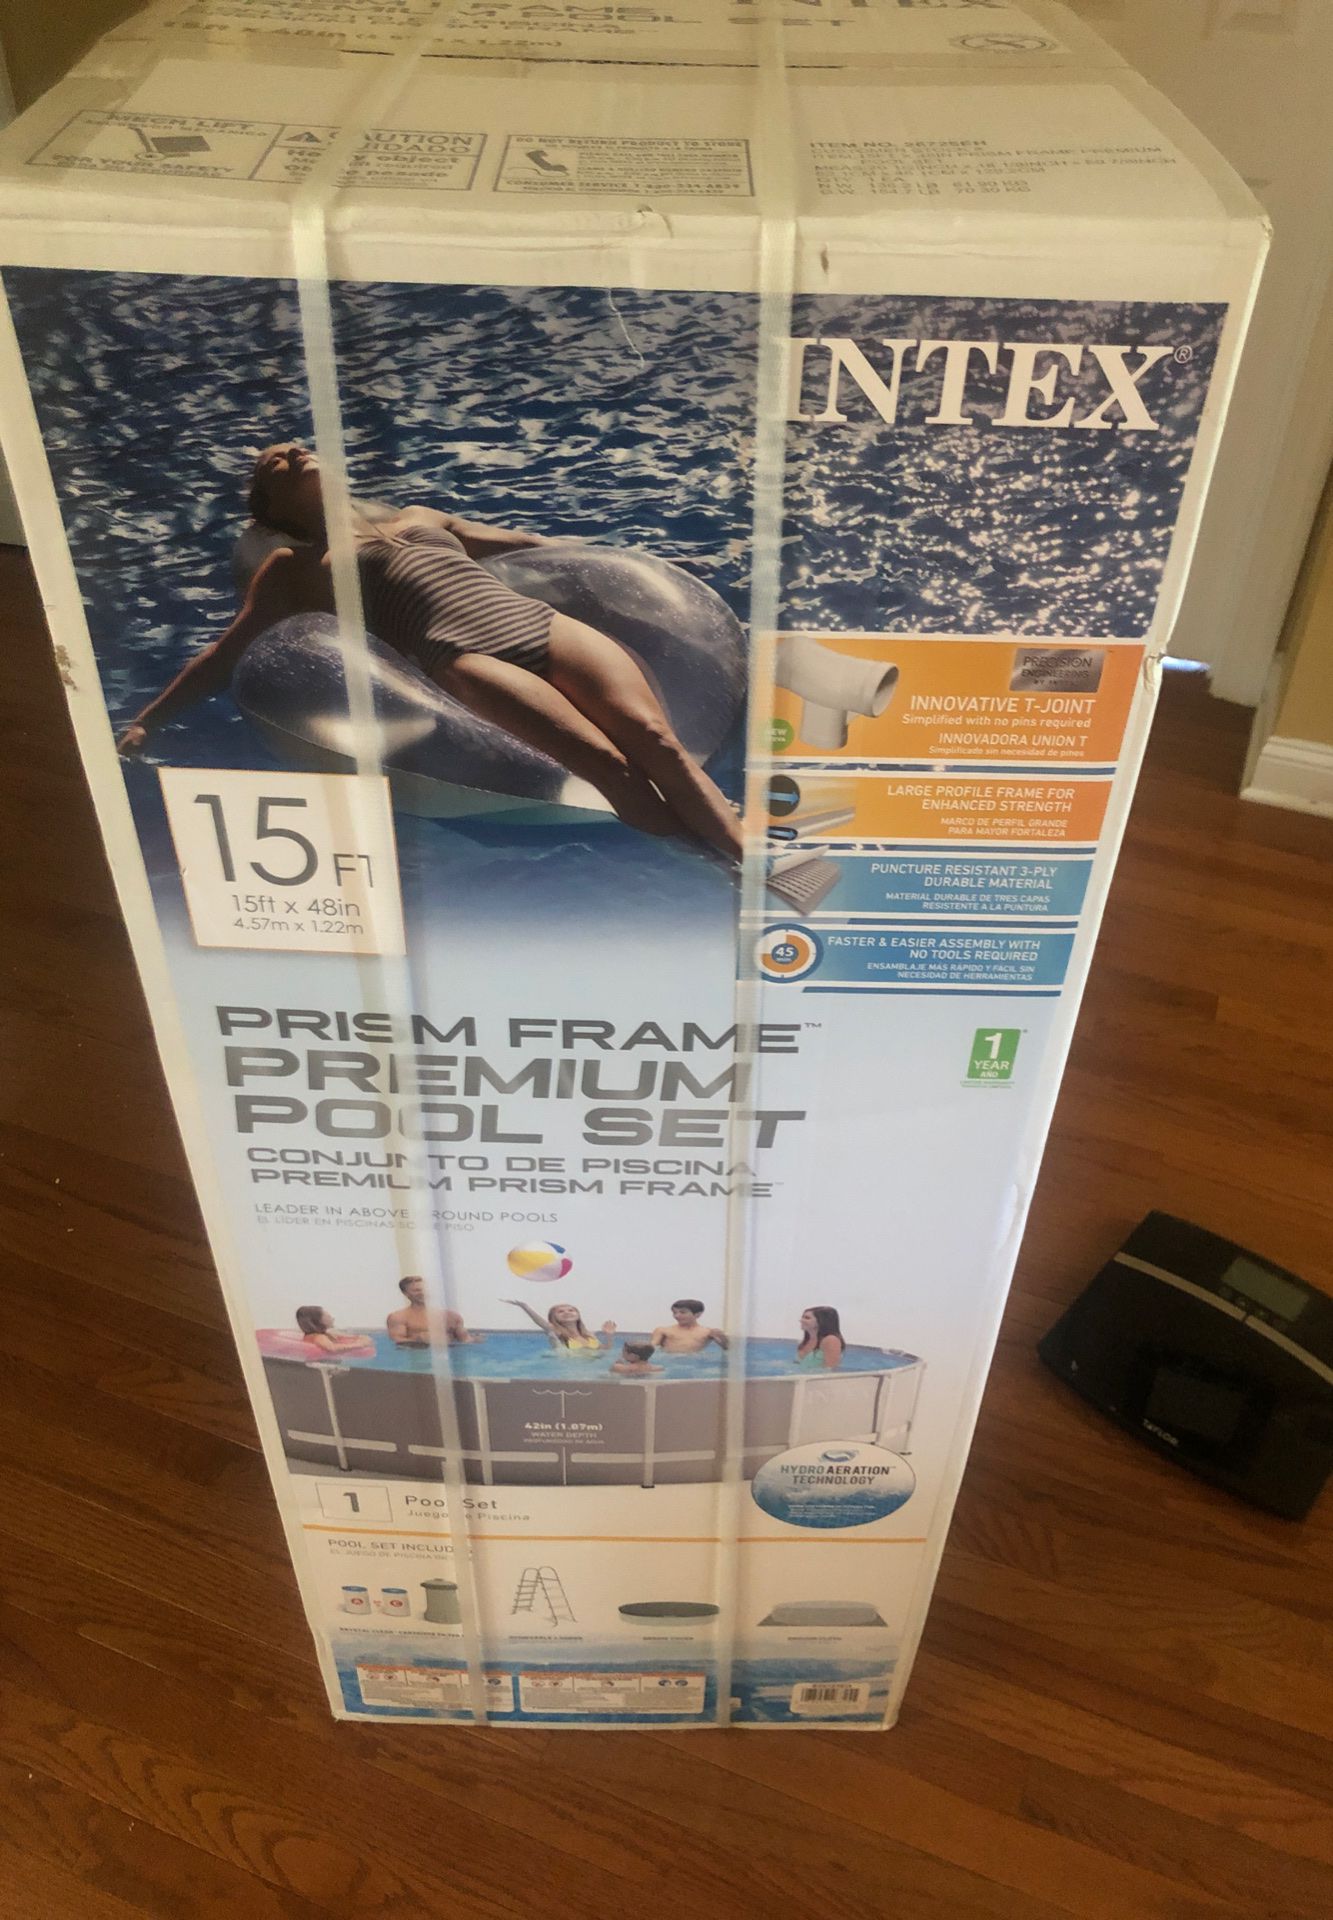 Intex 15ft x 48in Grey Prism Frame Pool Set with Cover,Ladder & Pump 26725eh